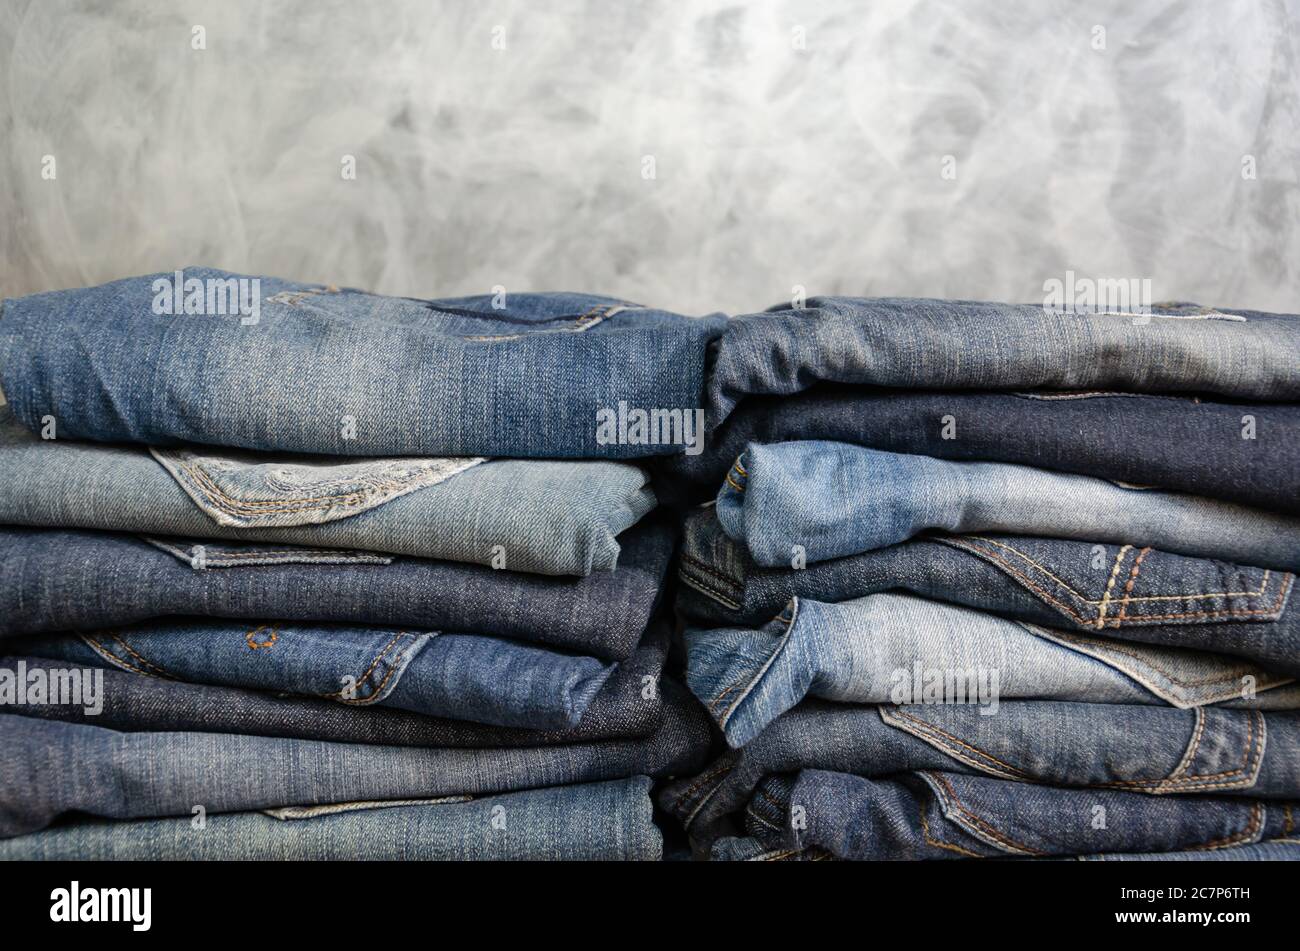 Carelessly folded jeans in two piles on a gray background. Close-up of jeans in different colors. Jeans texture or denim background. Copy space Stock Photo